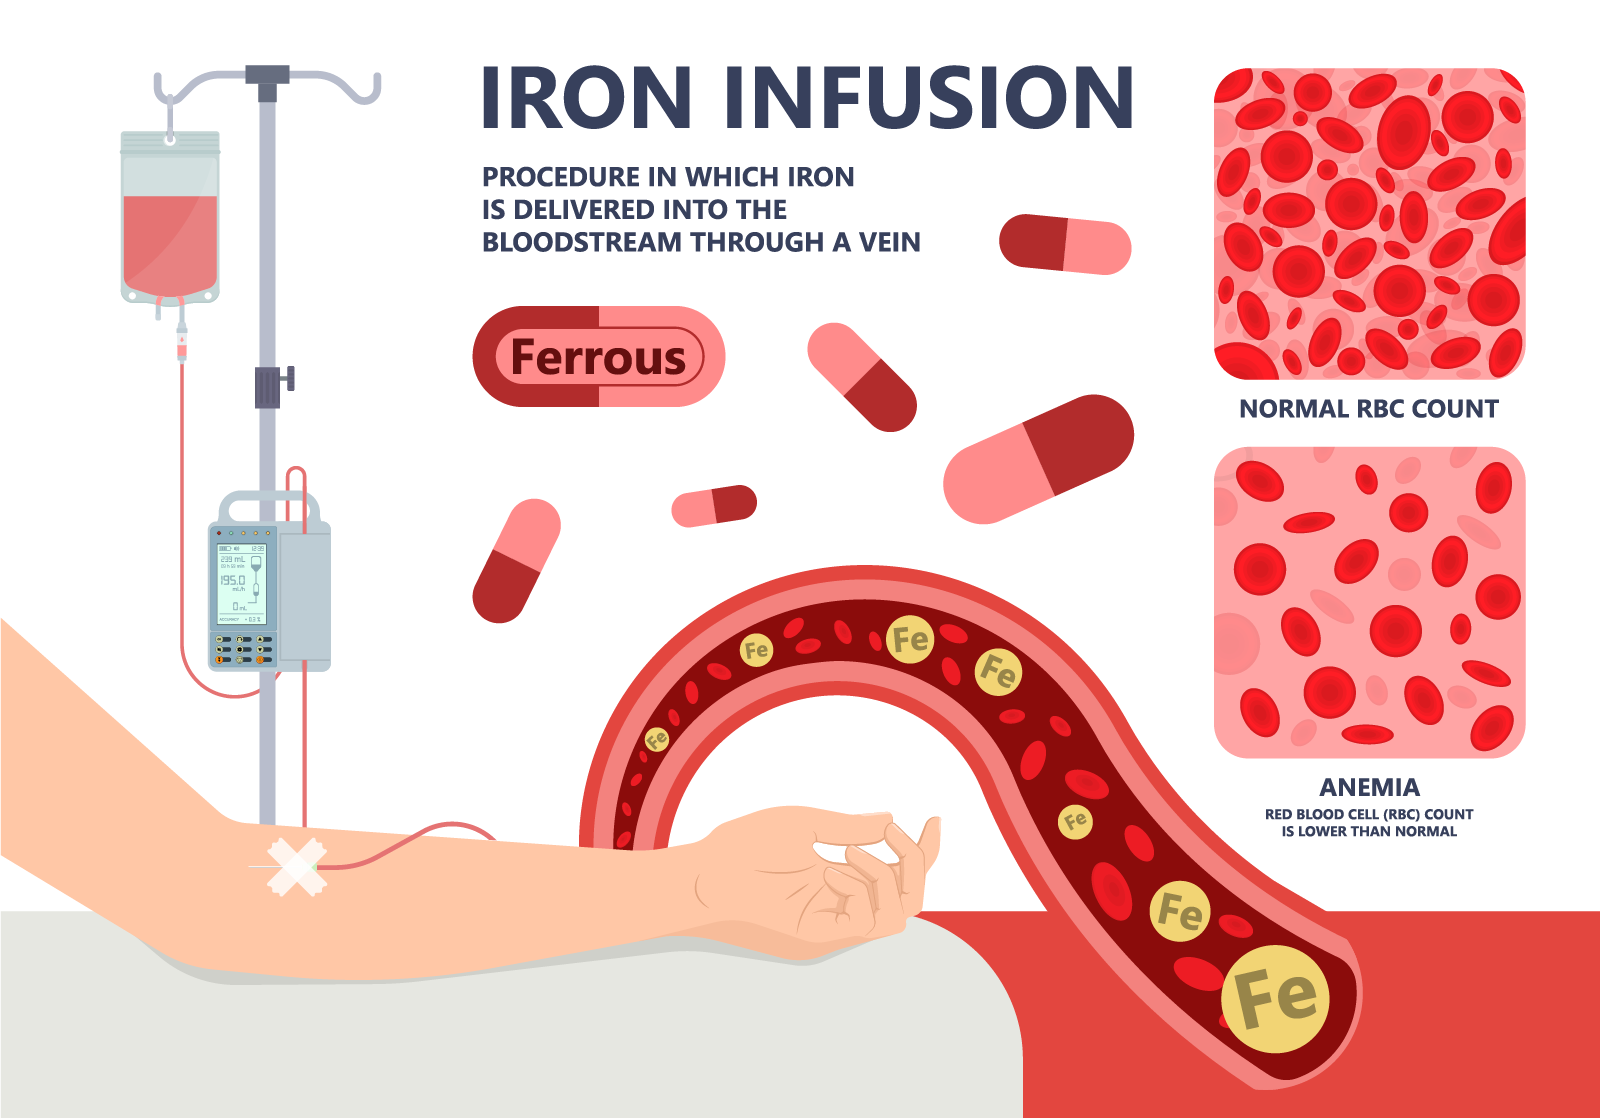 iv iron transfusions for anemia